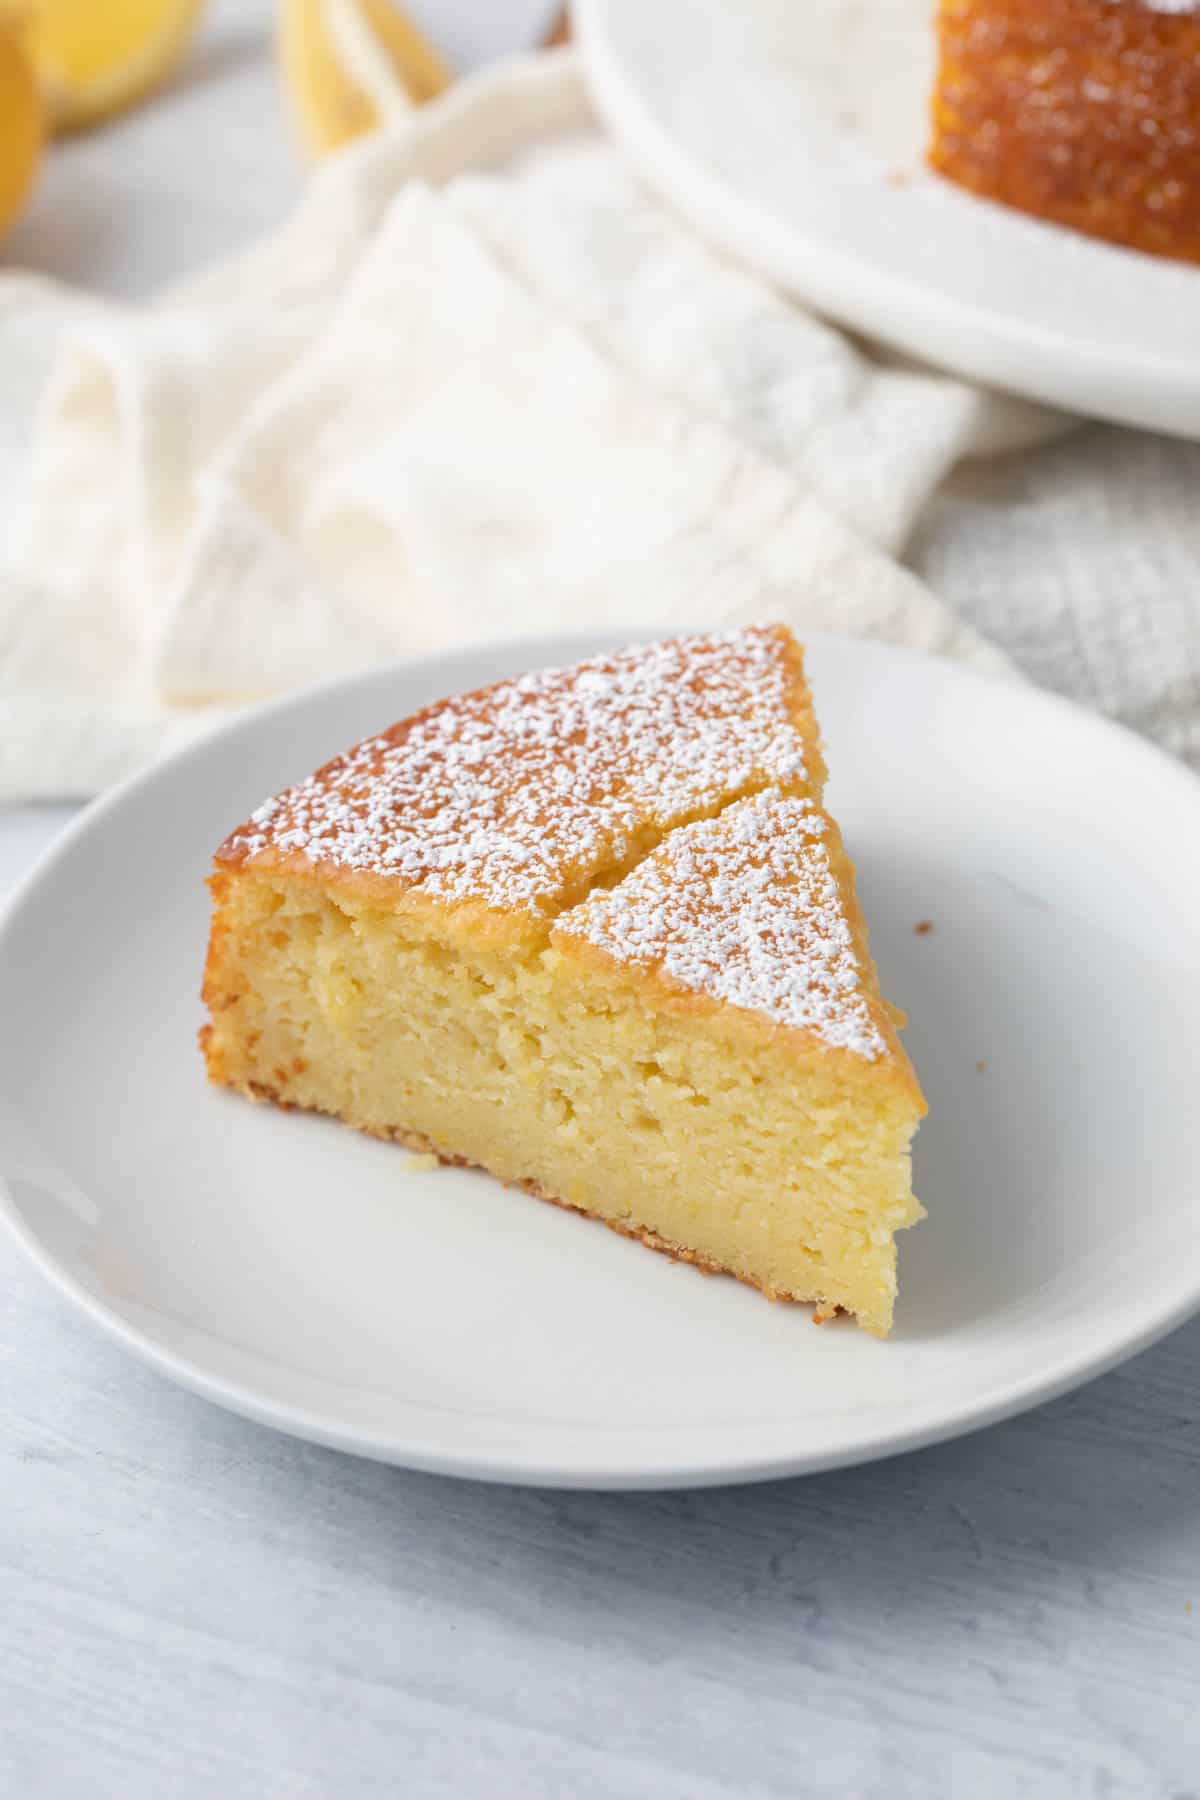 Slice of lemon ricotta cake showing a rich and moist crumb, topped with powder sugar.